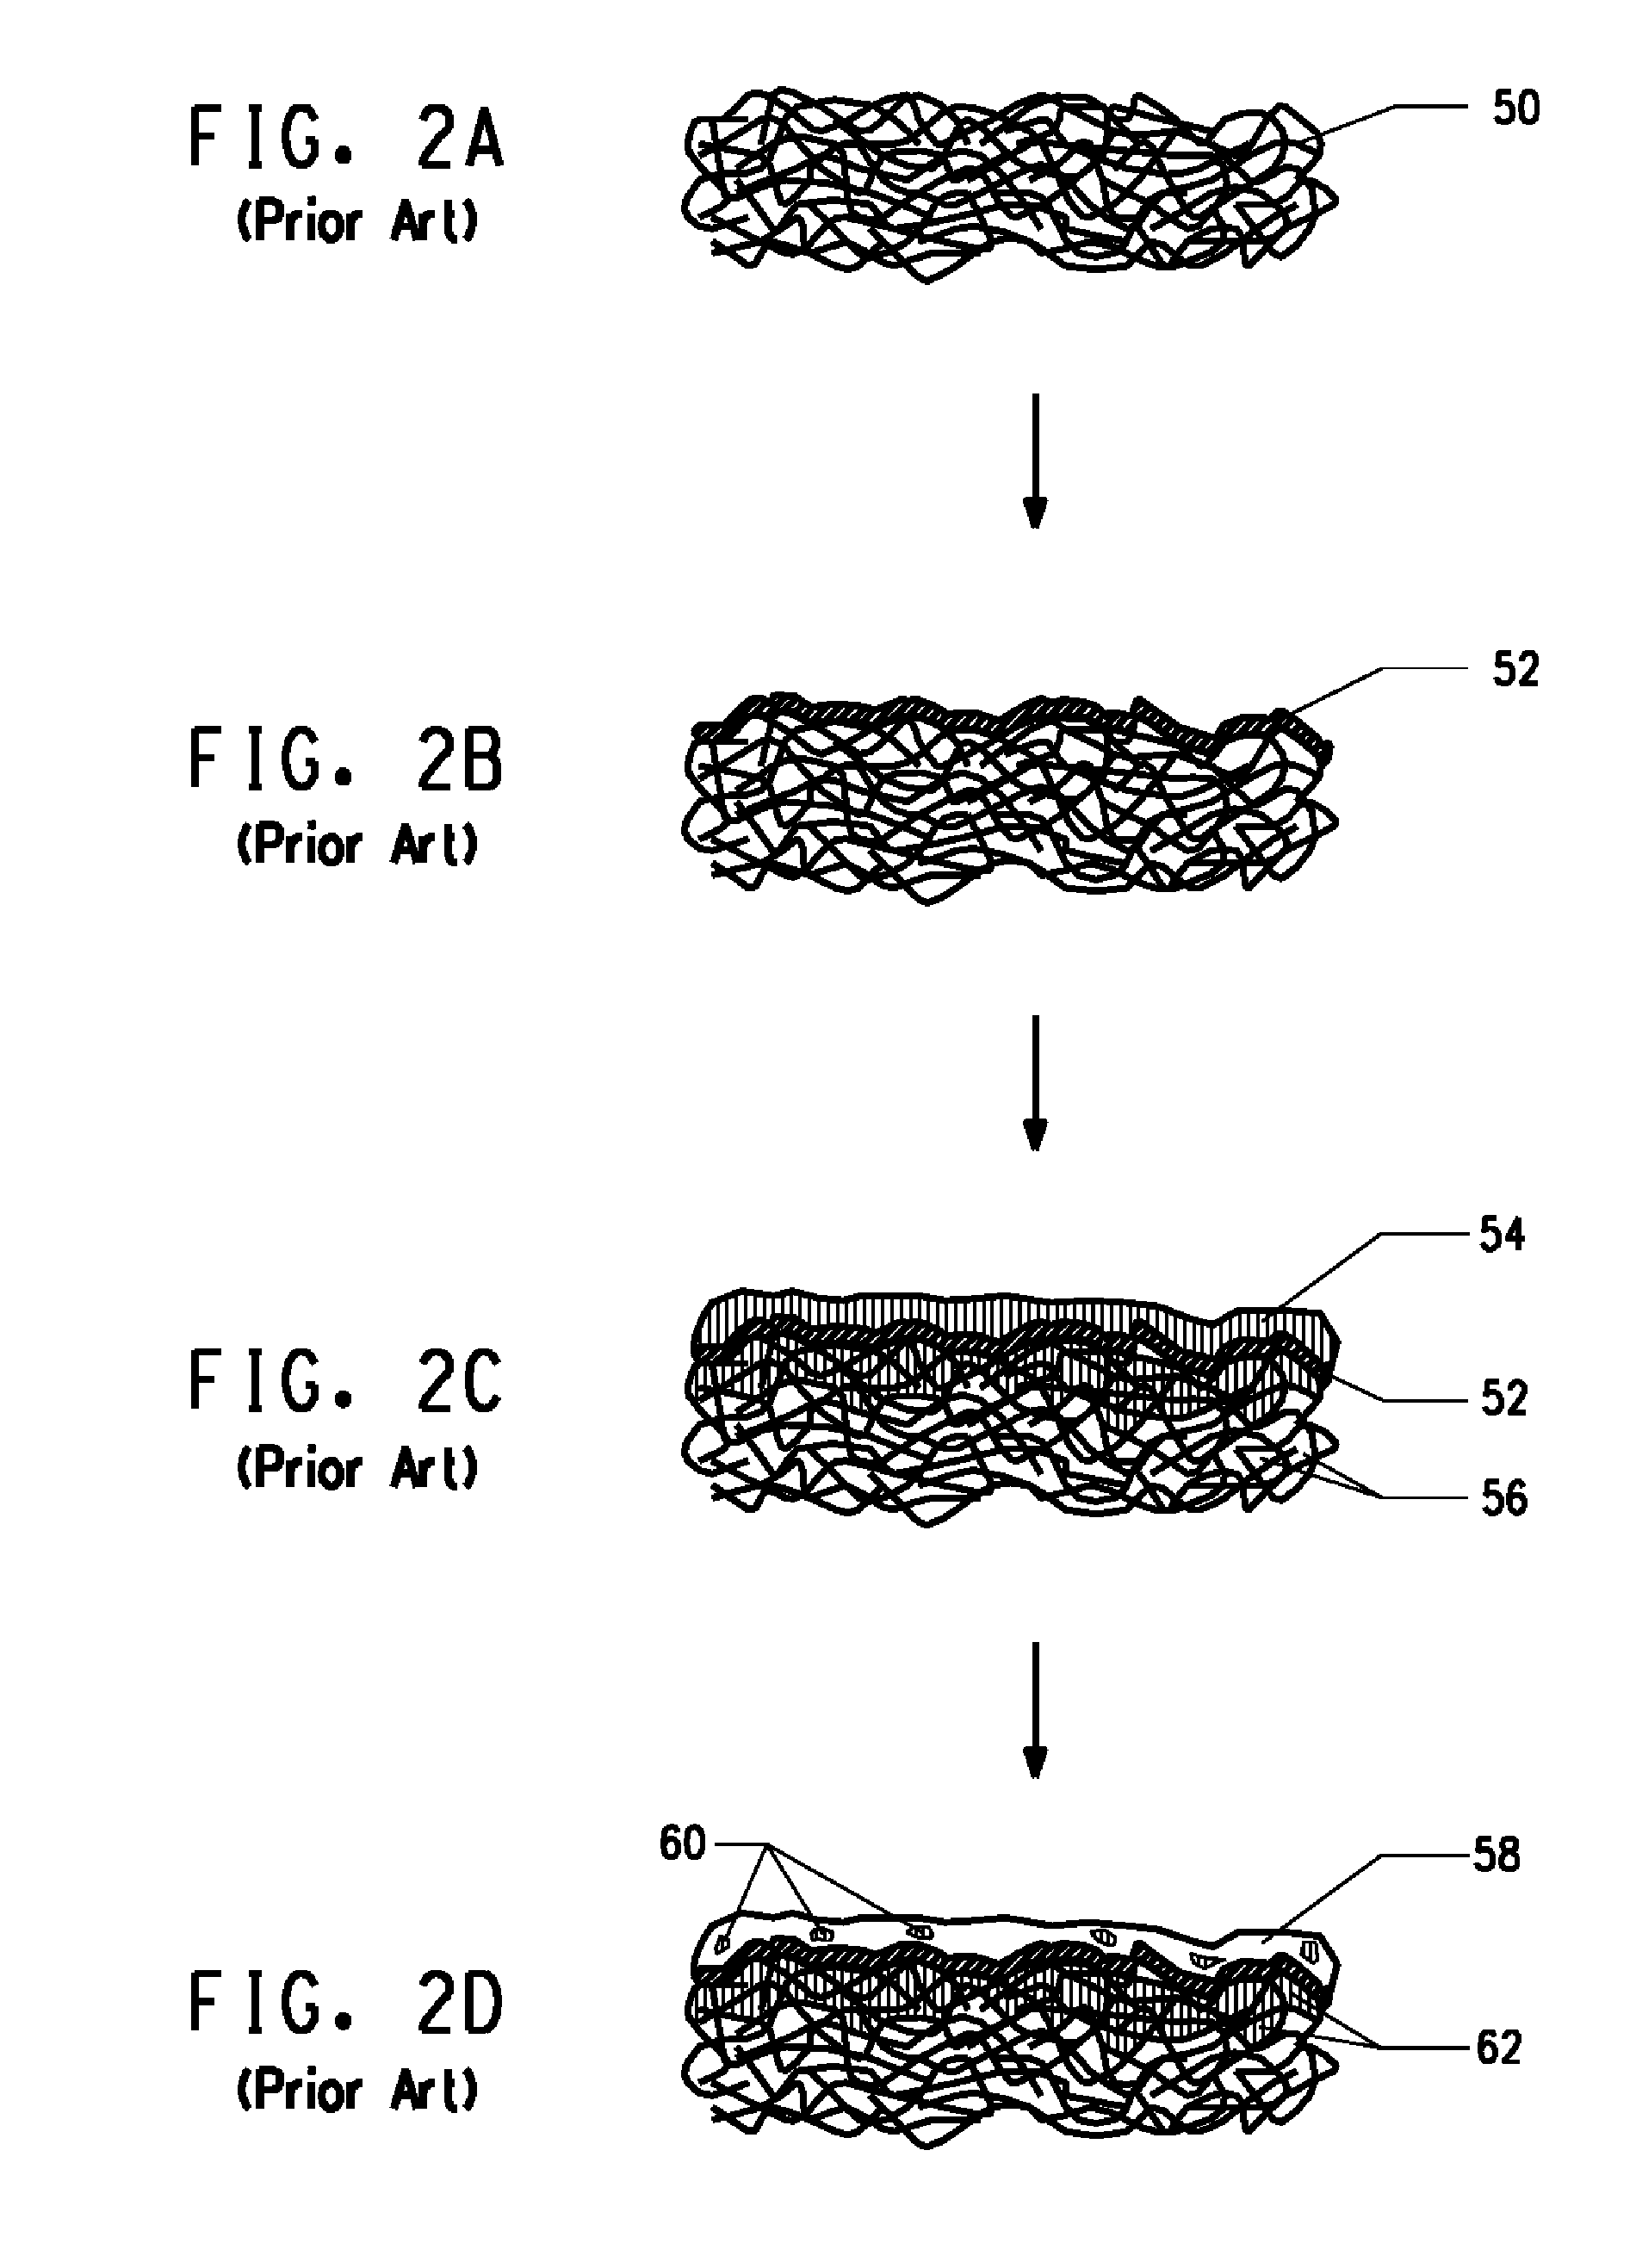 Method for producing metalized fibrous composite sheet with olefin coating